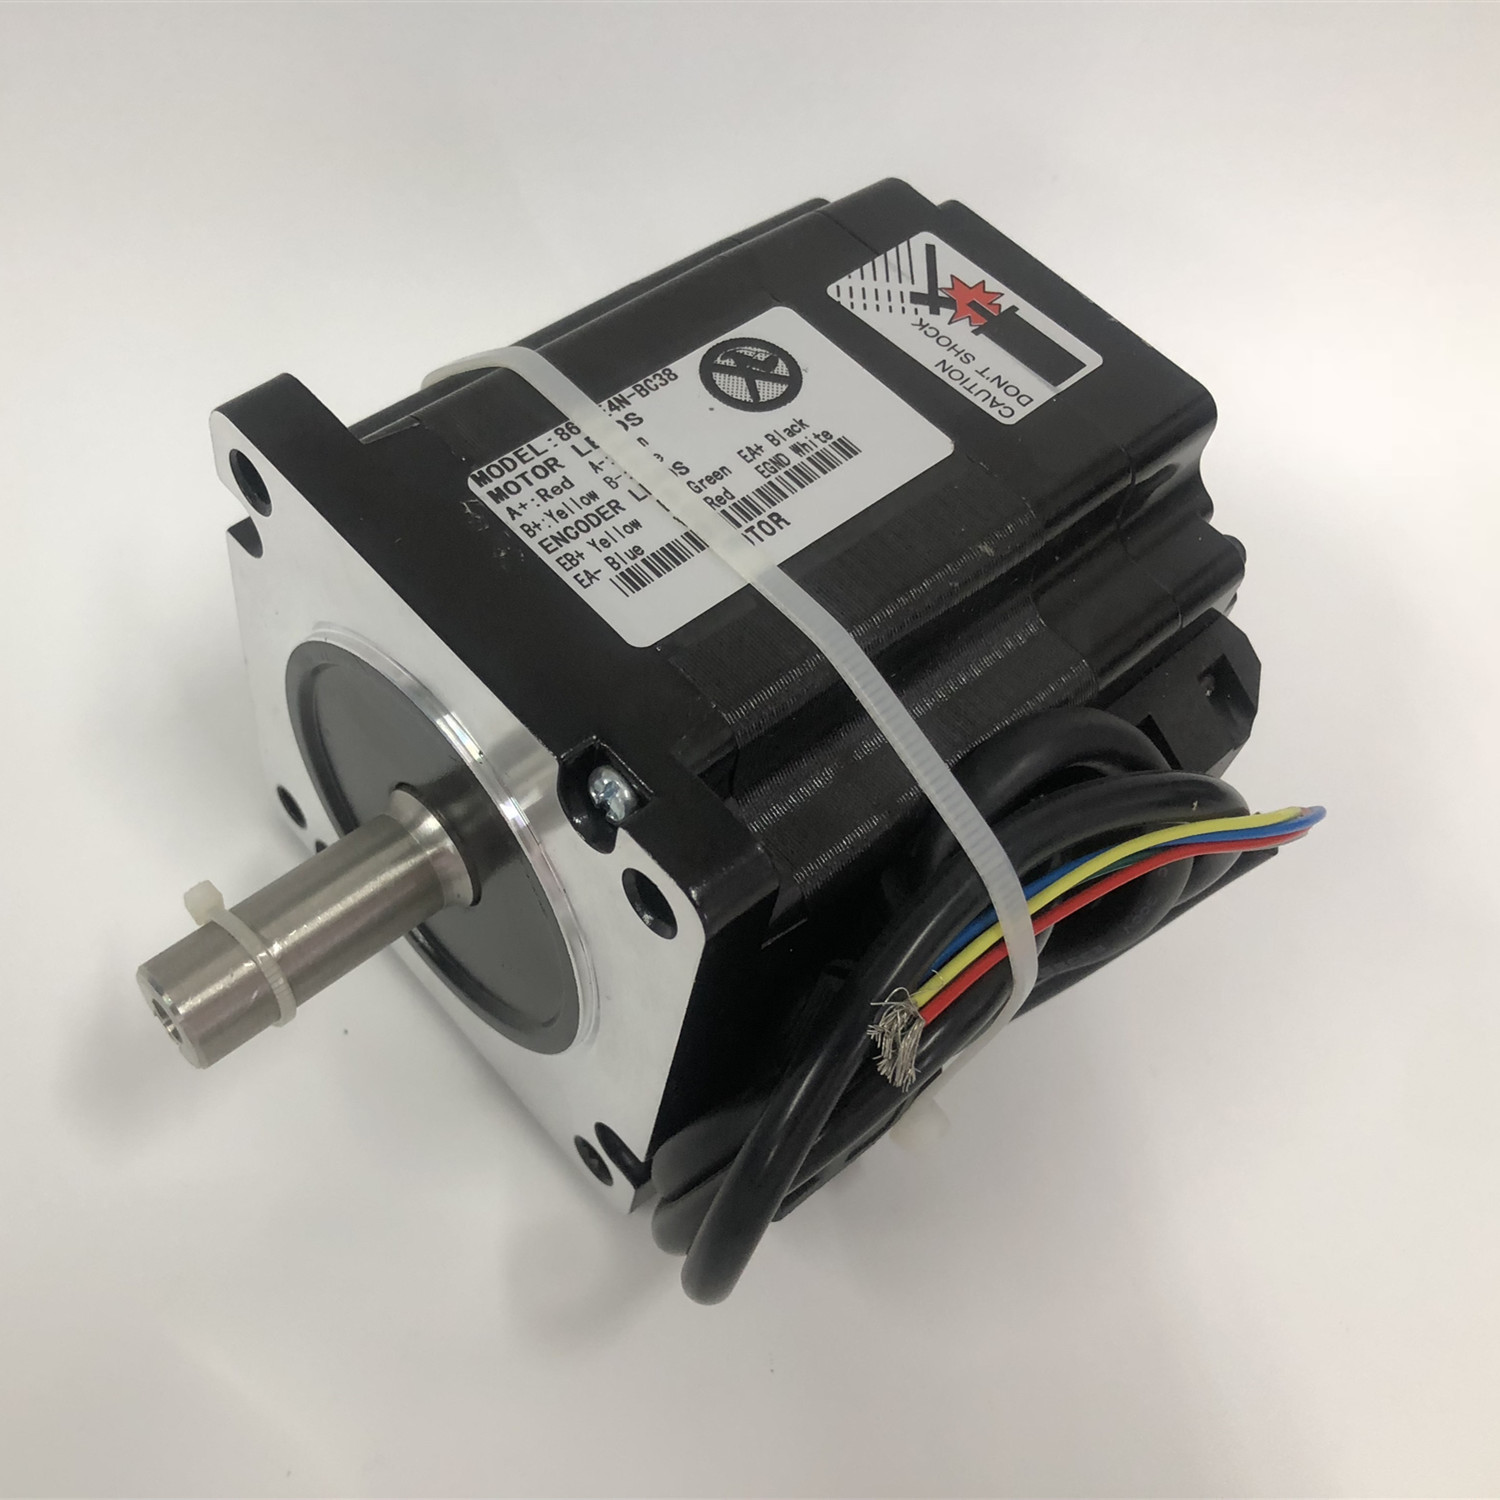  2 Phase Ac Servo Motor Nema 17 With Encoder And Driver HSS42 0.55NM 42HSE05N-D24 Manufactures